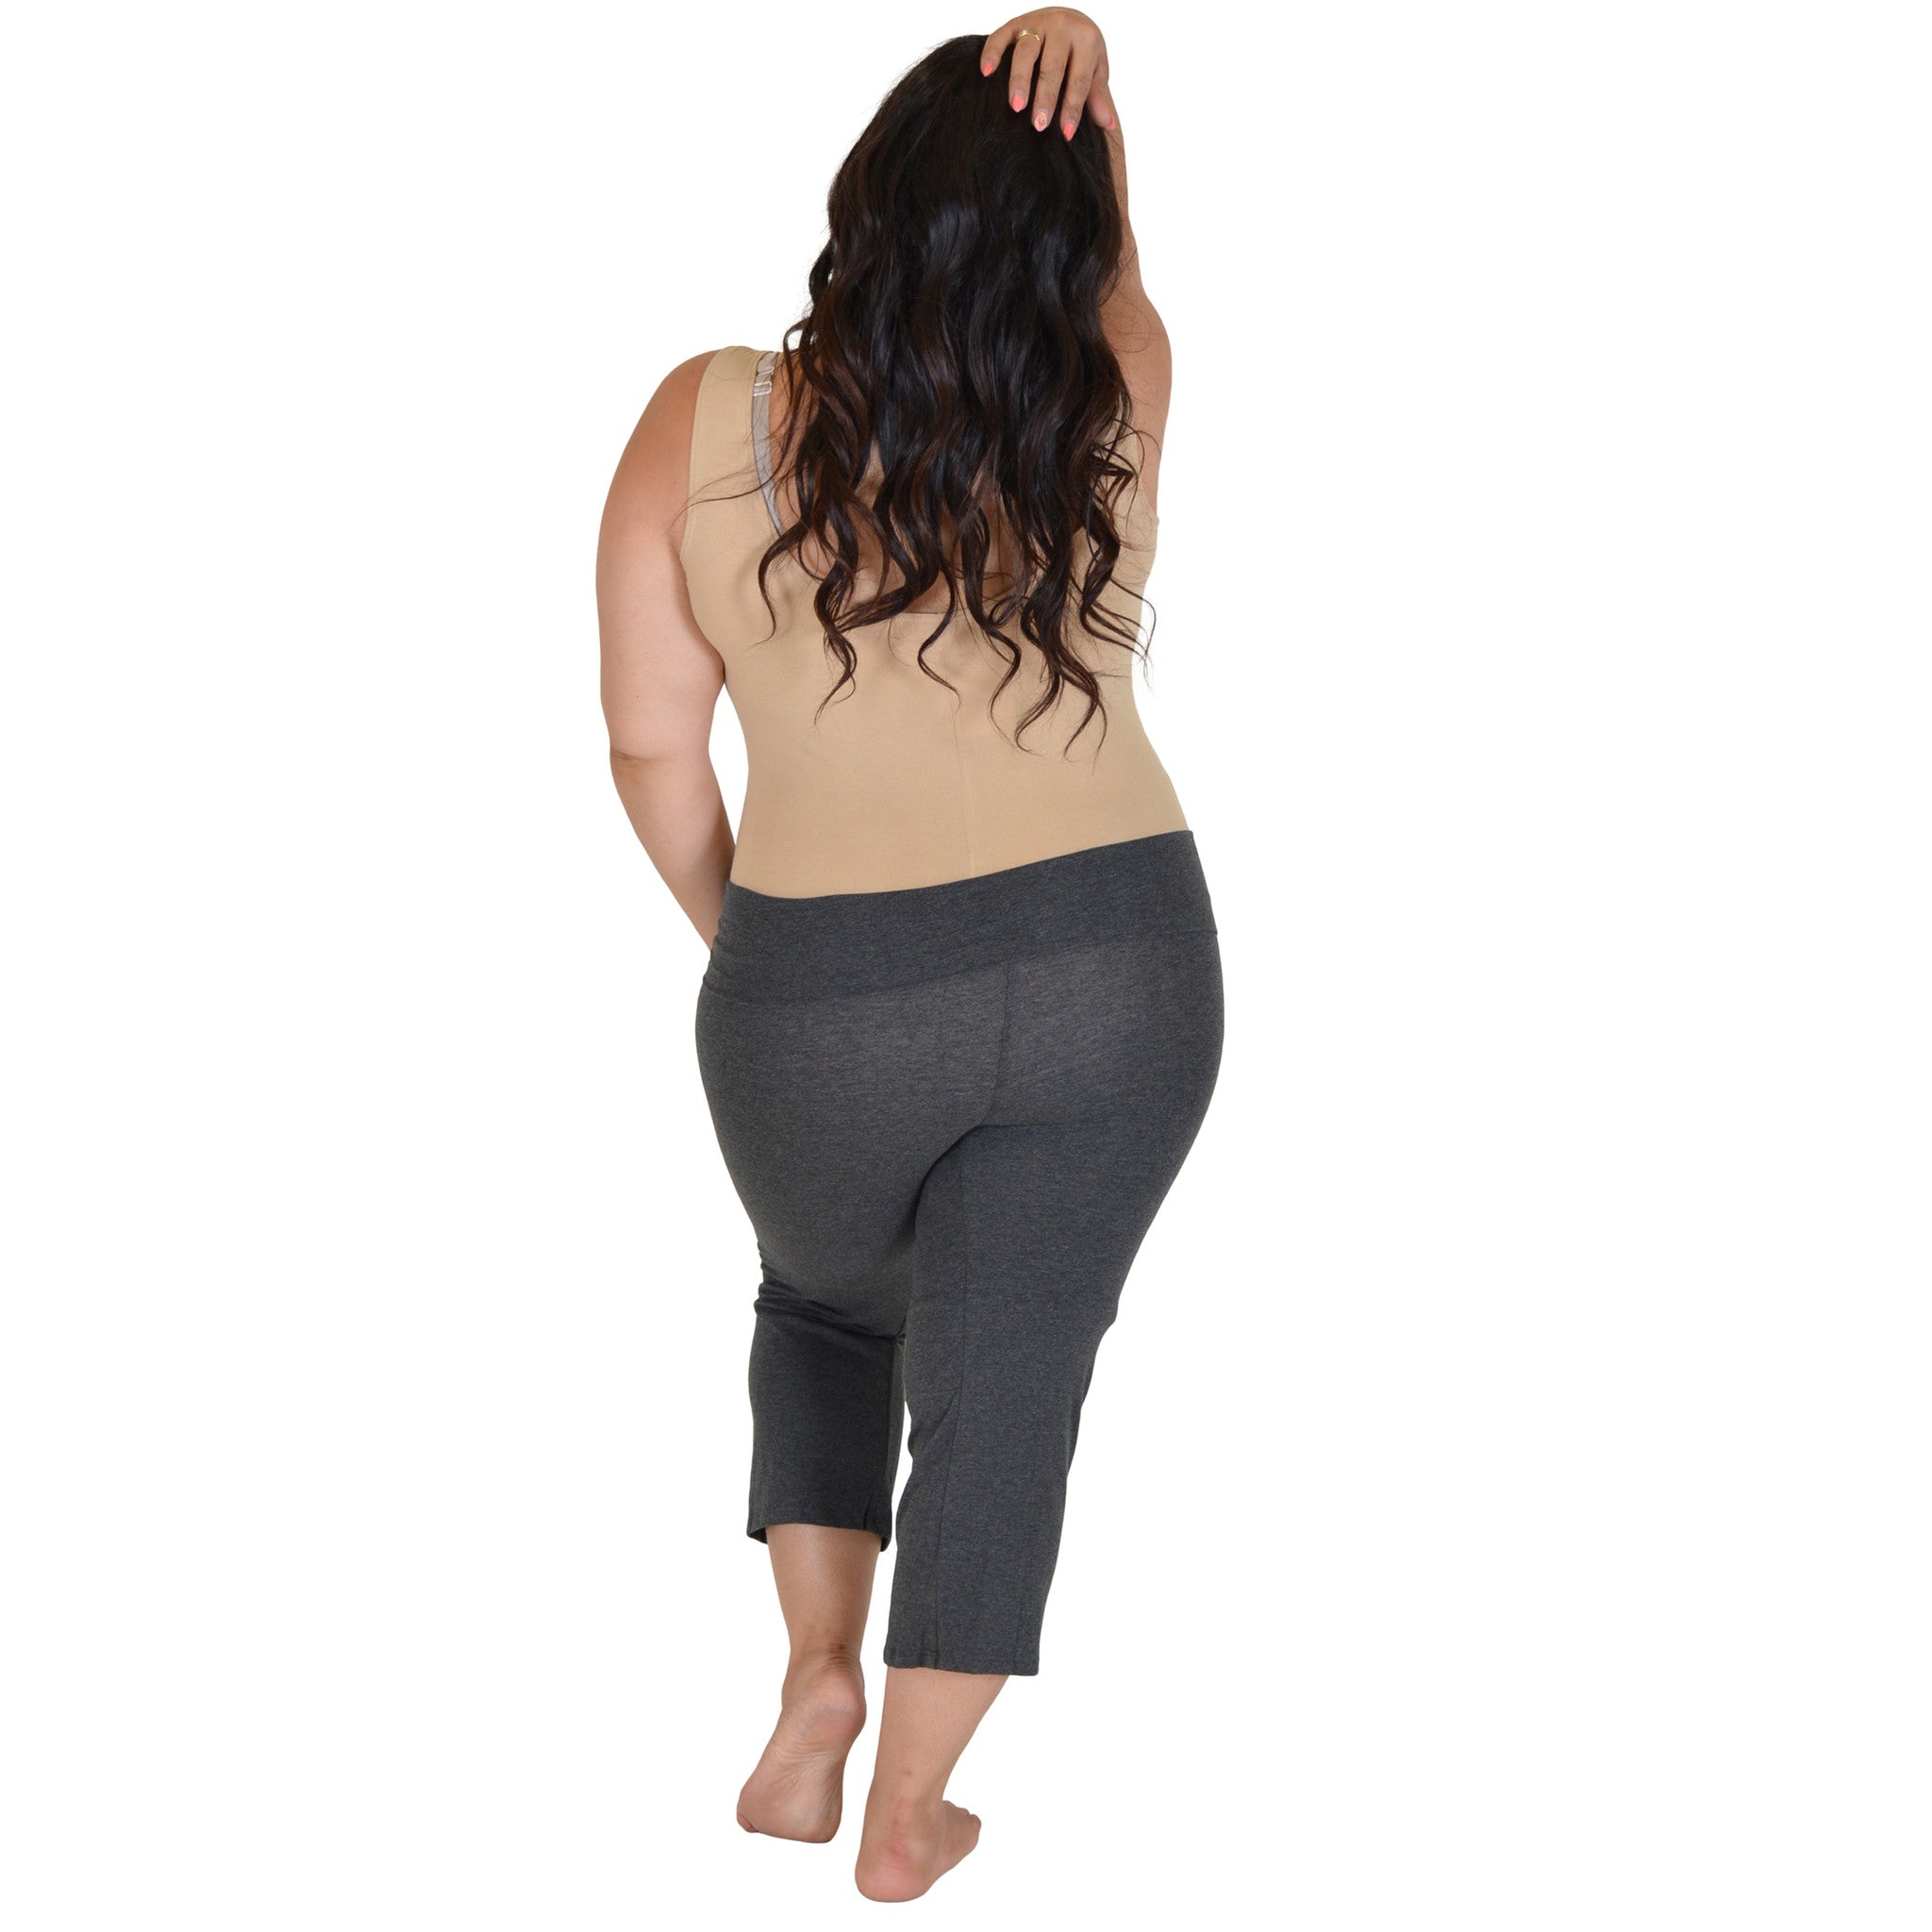 Stylzoo Women's Plus Size Comfy Stretch Ankle Length Leggings Yoga